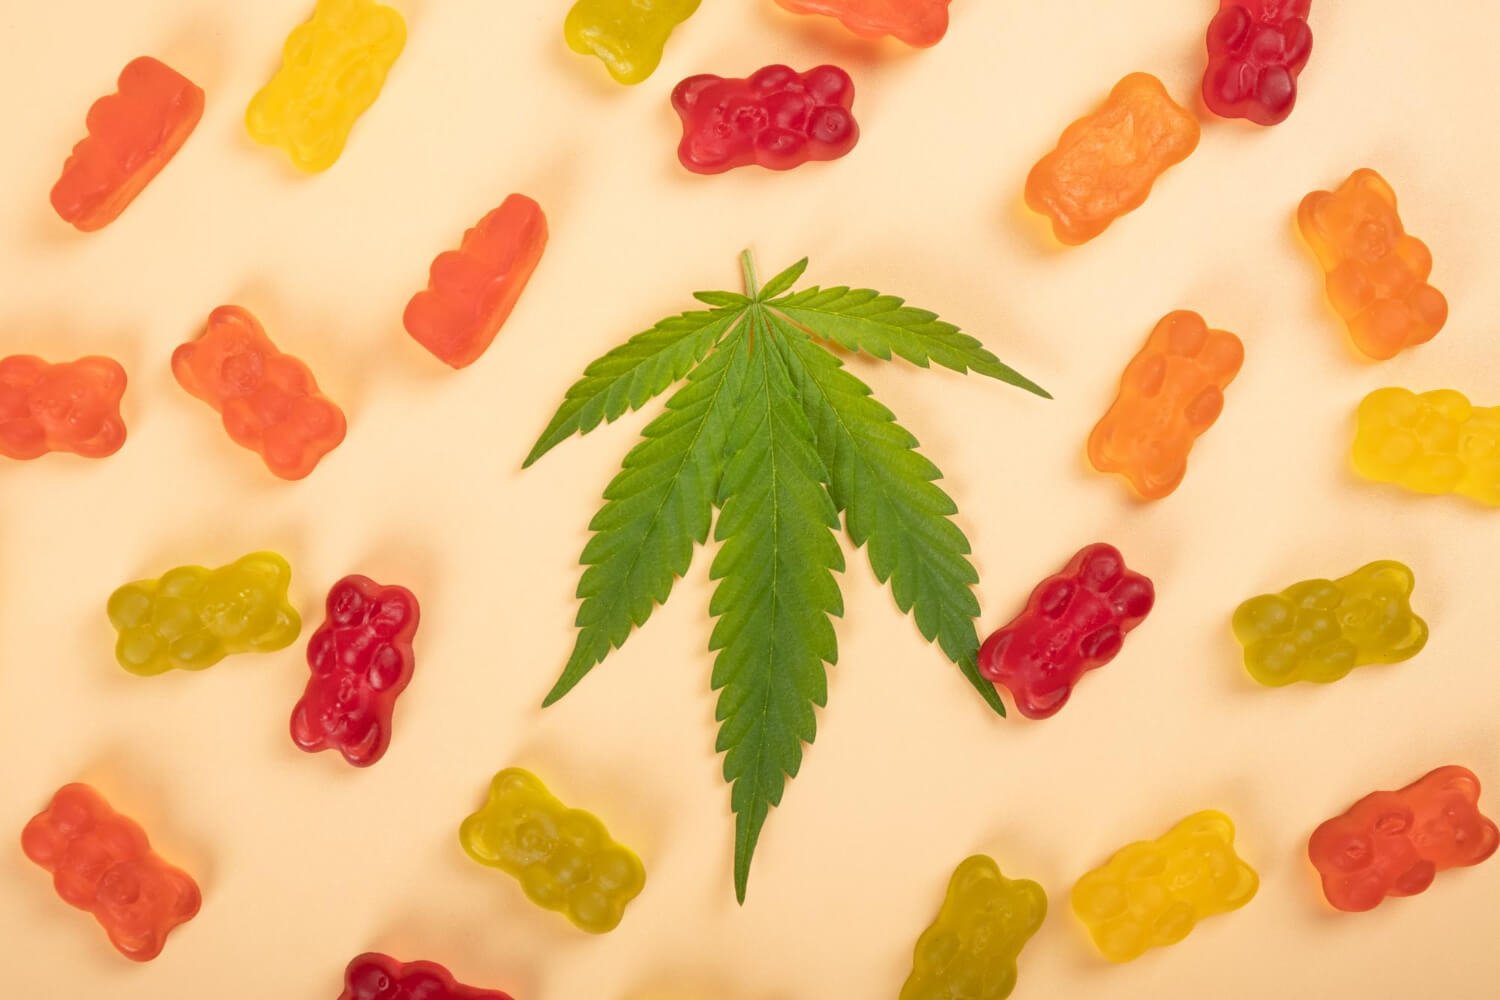 The CRC announced its intentions to relax strict rules surrounding edible cannabis products.